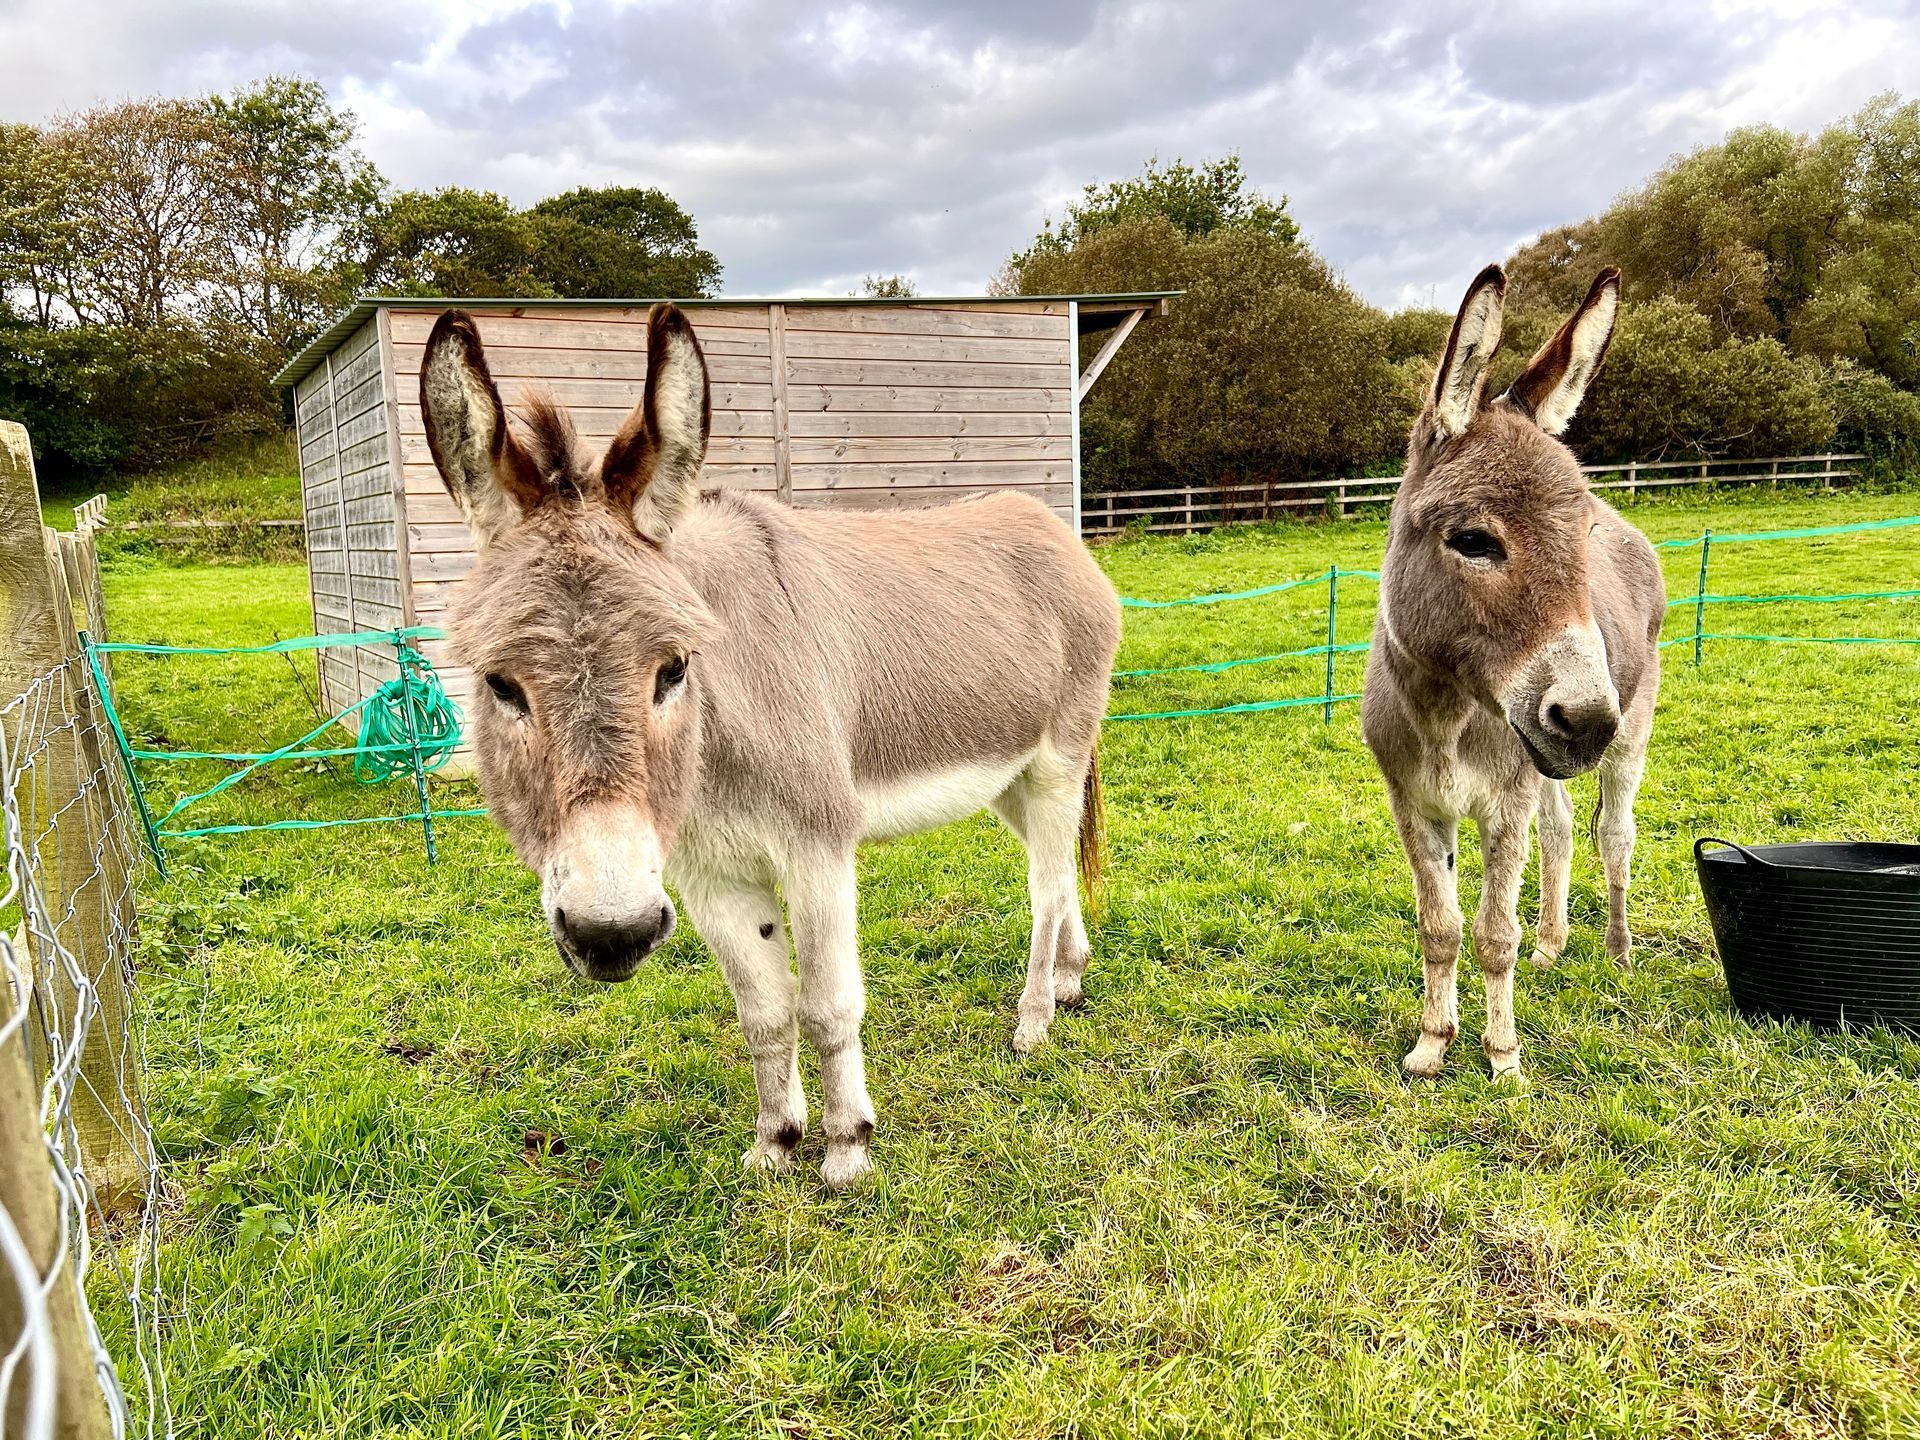 Two donkeys stood in a field with shelter behind them